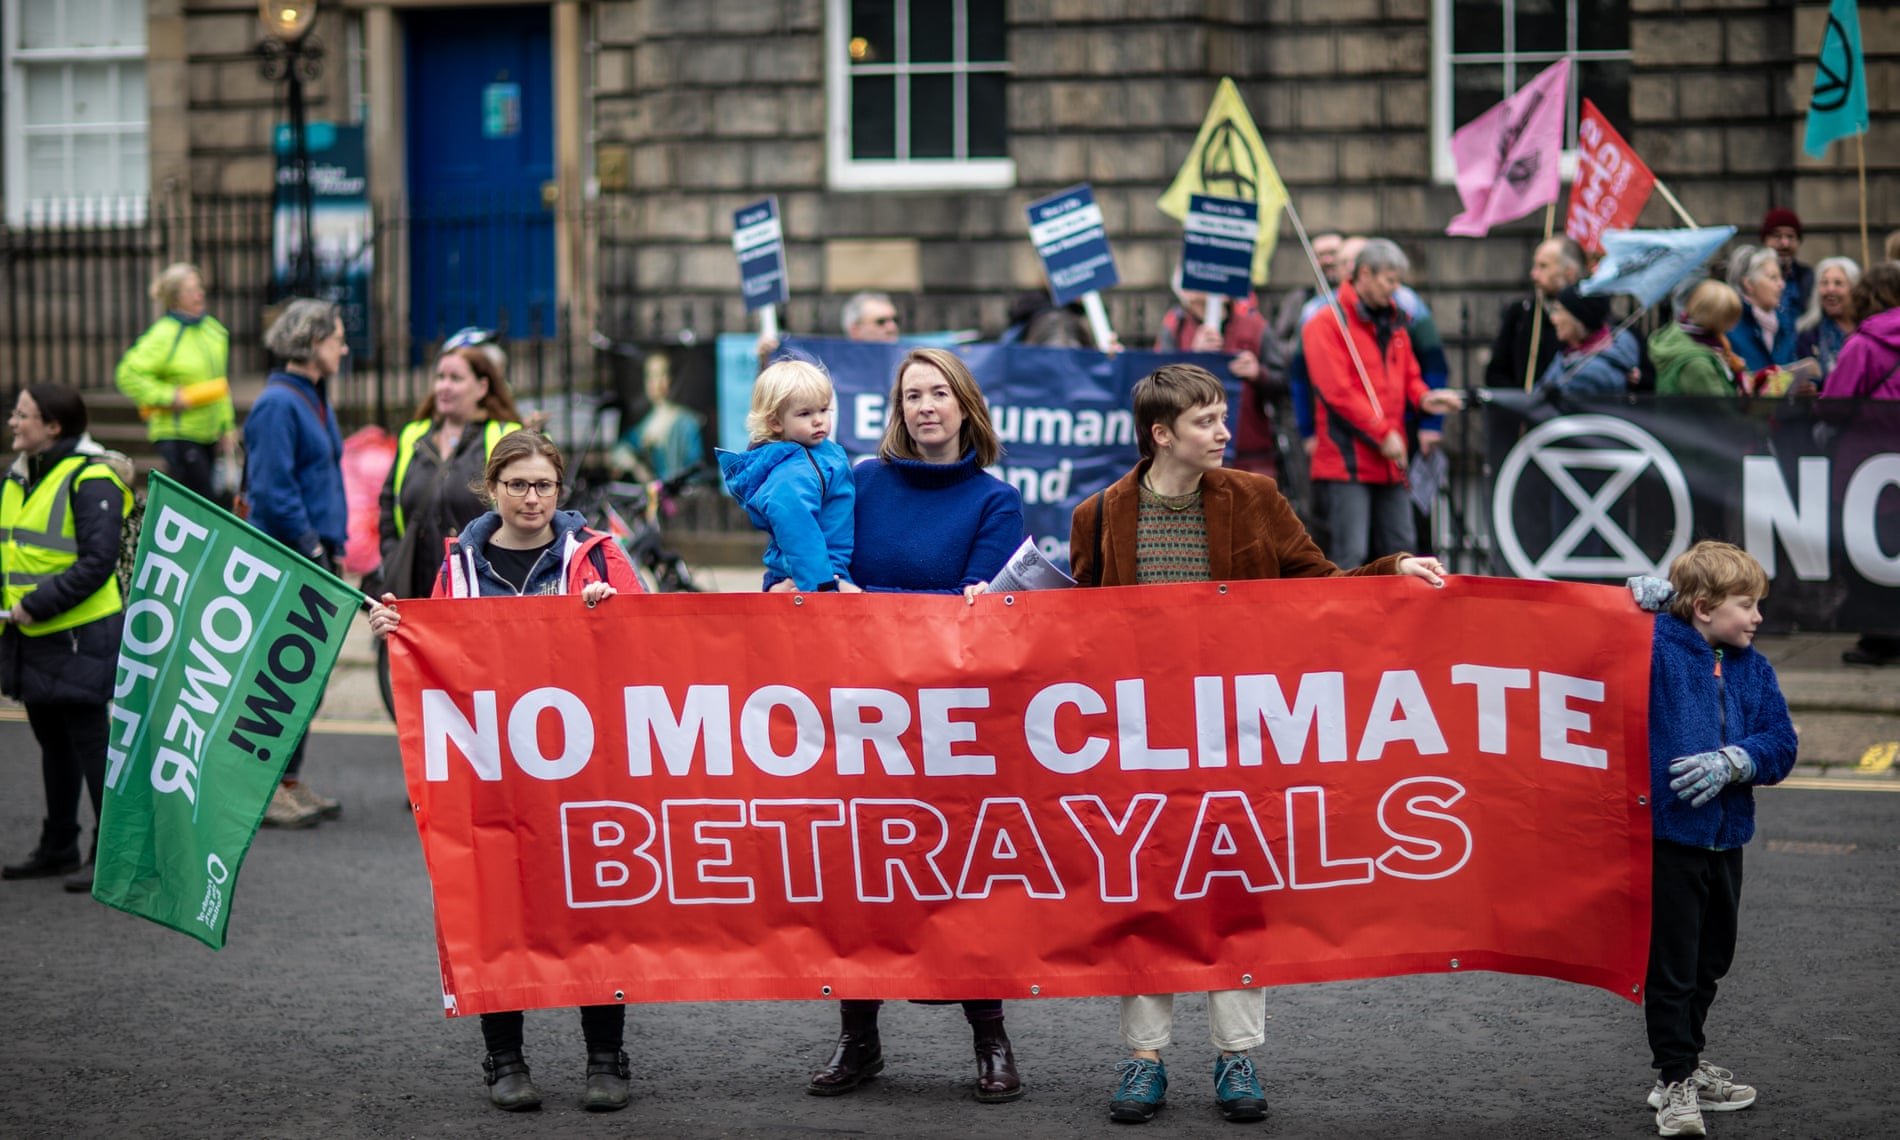 Scottish Green Policies in Peril: Despair as Power-Sharing Ends and Key Initiatives Are Sidelined